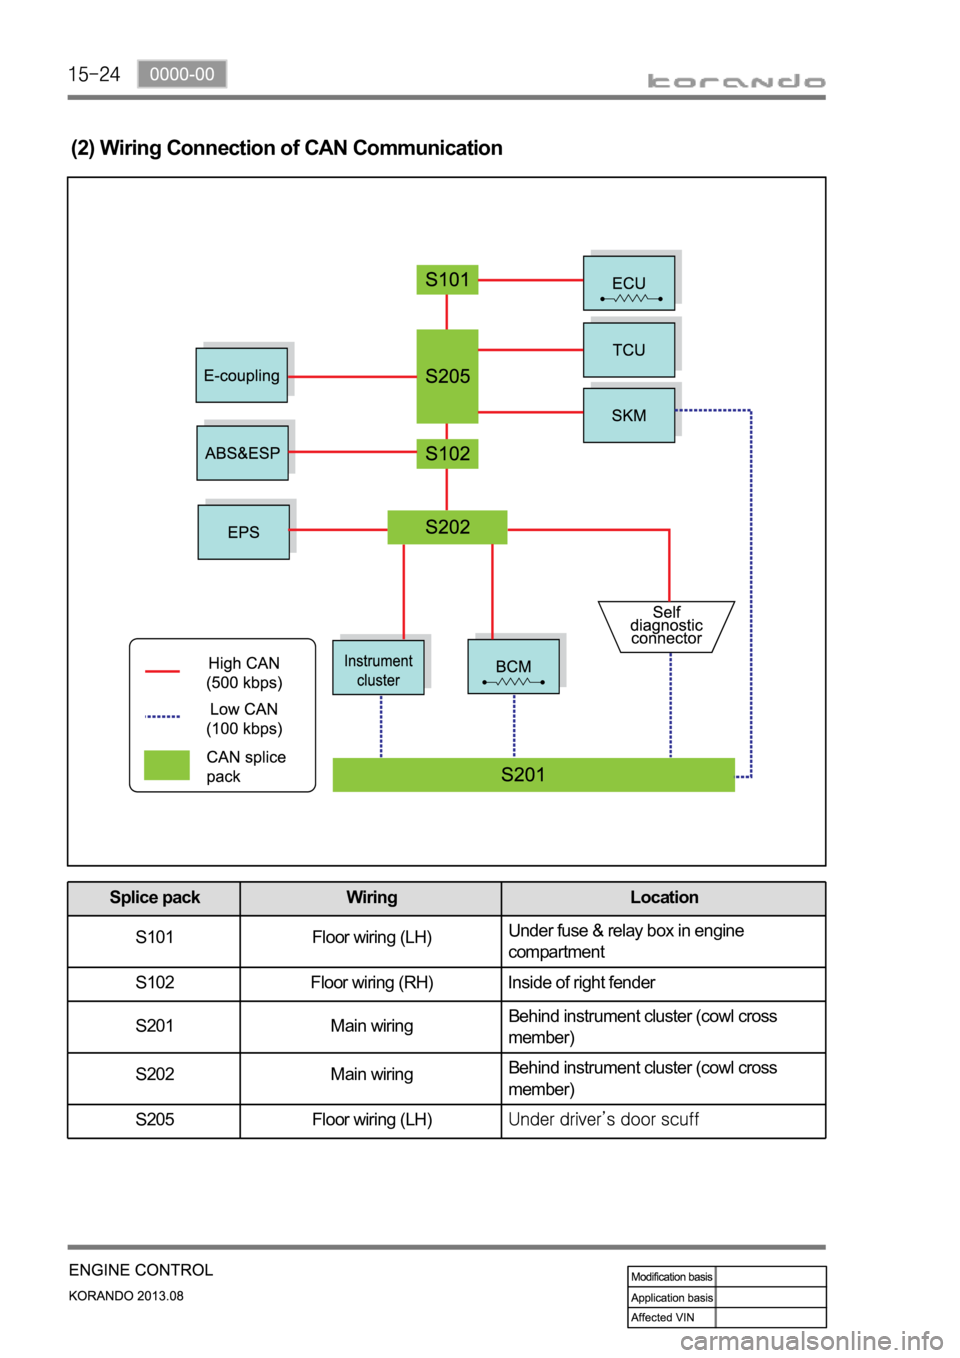 SSANGYONG KORANDO 2013  Service Manual (2) Wiring Connection of CAN Communication
Splice pack Wiring Location
S101 Floor wiring (LH)Under fuse & relay box in engine 
compartment
S102 Floor wiring (RH) Inside of right fender
S201 Main wirin